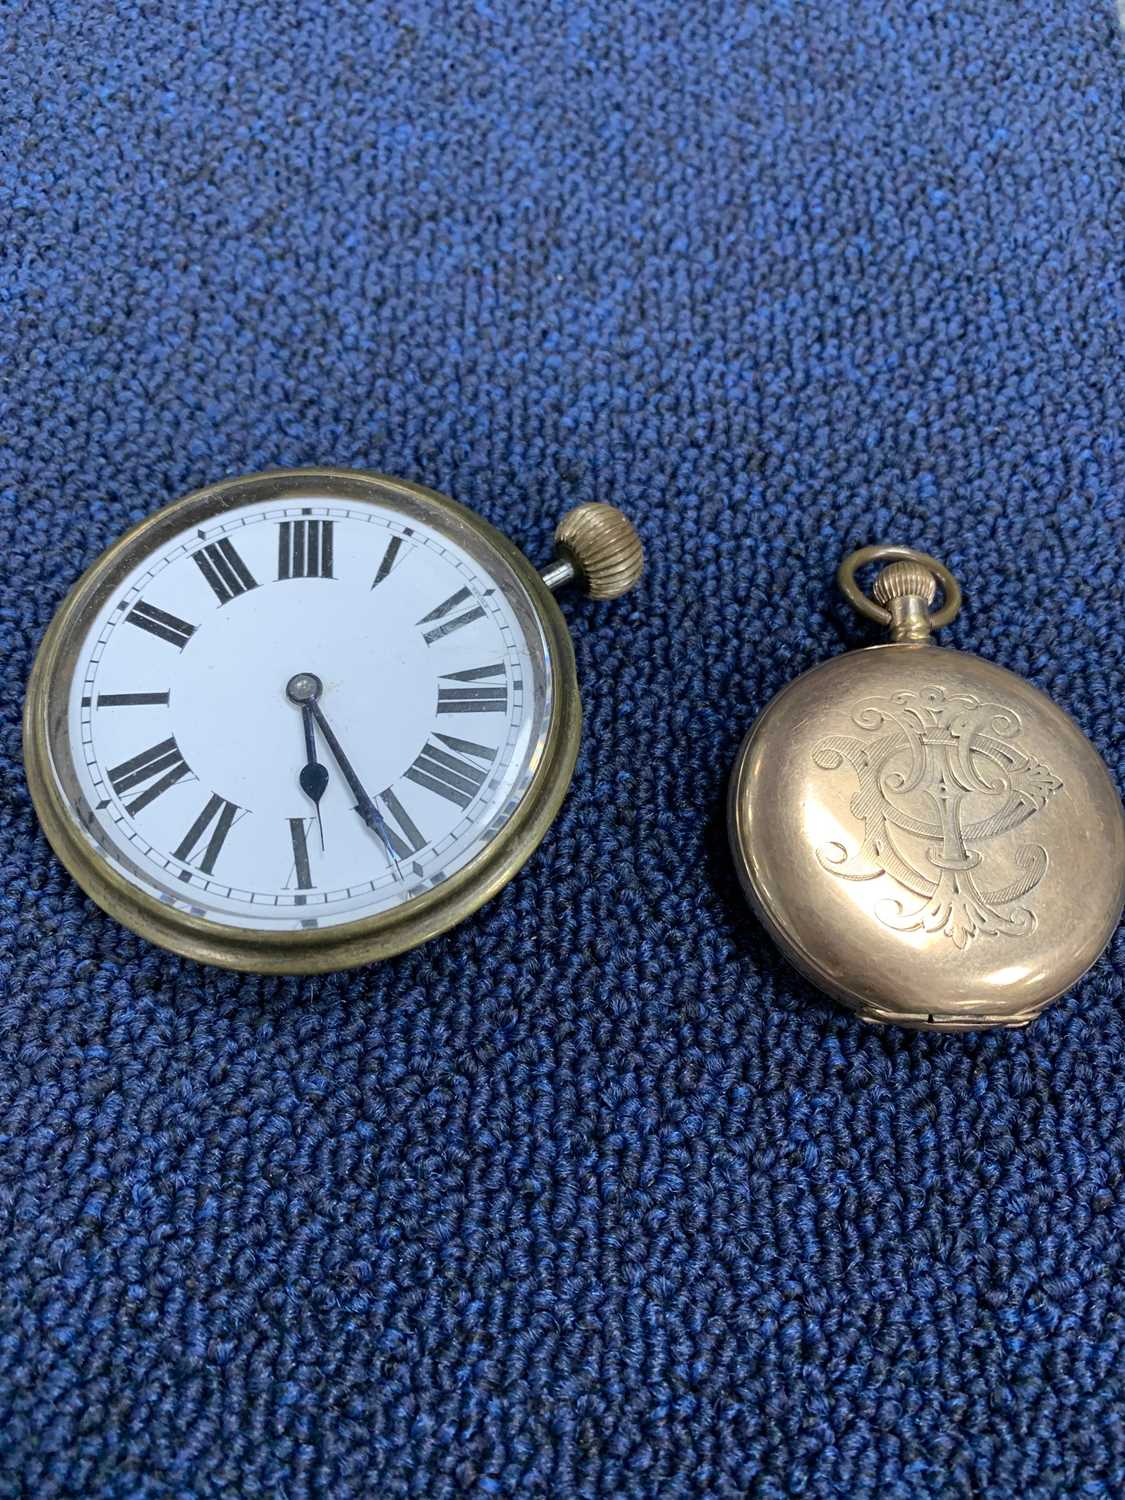 Lot 18 - A VICTORIAN  POCKET WATCH BY WALTHAM IN A GOLD PLATED CASE AND A TRAVELLING TIMEPIECE